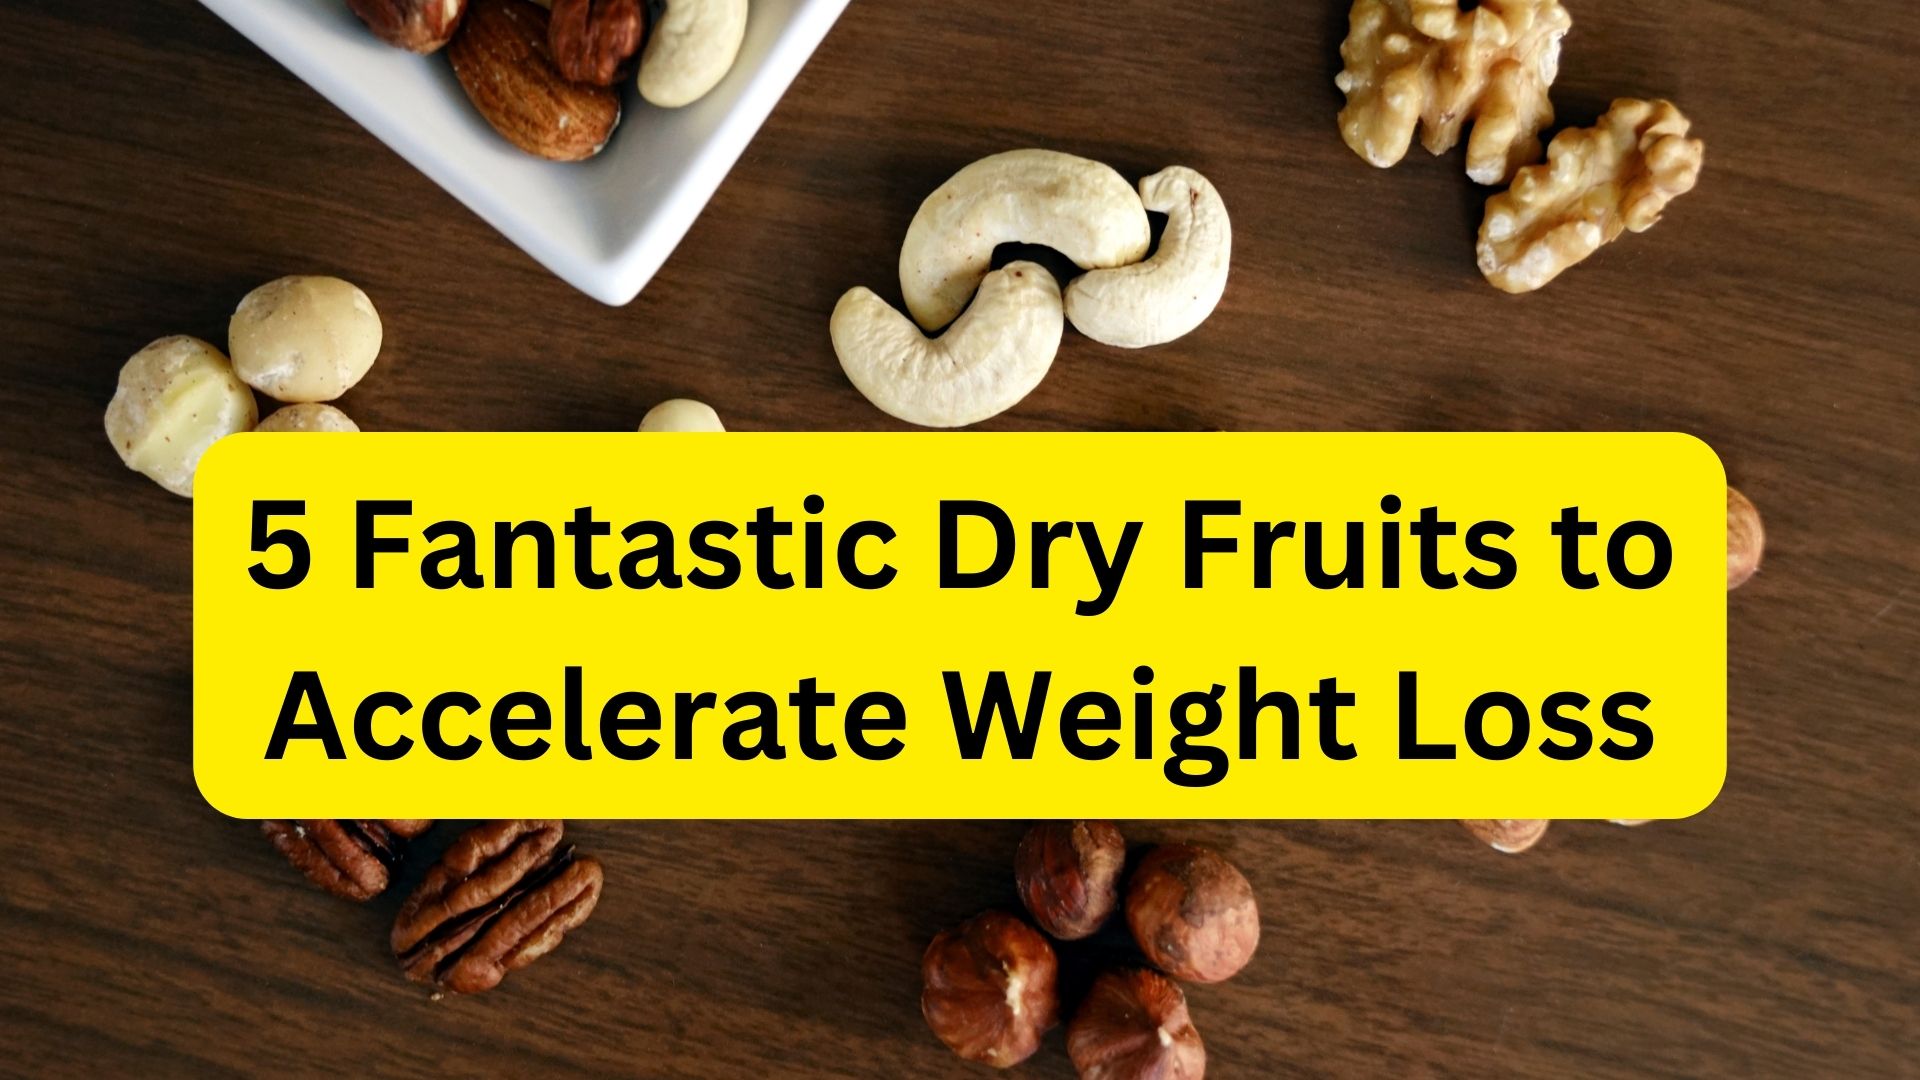 5 Fantastic Dry Fruits to Accelerate Weight Loss